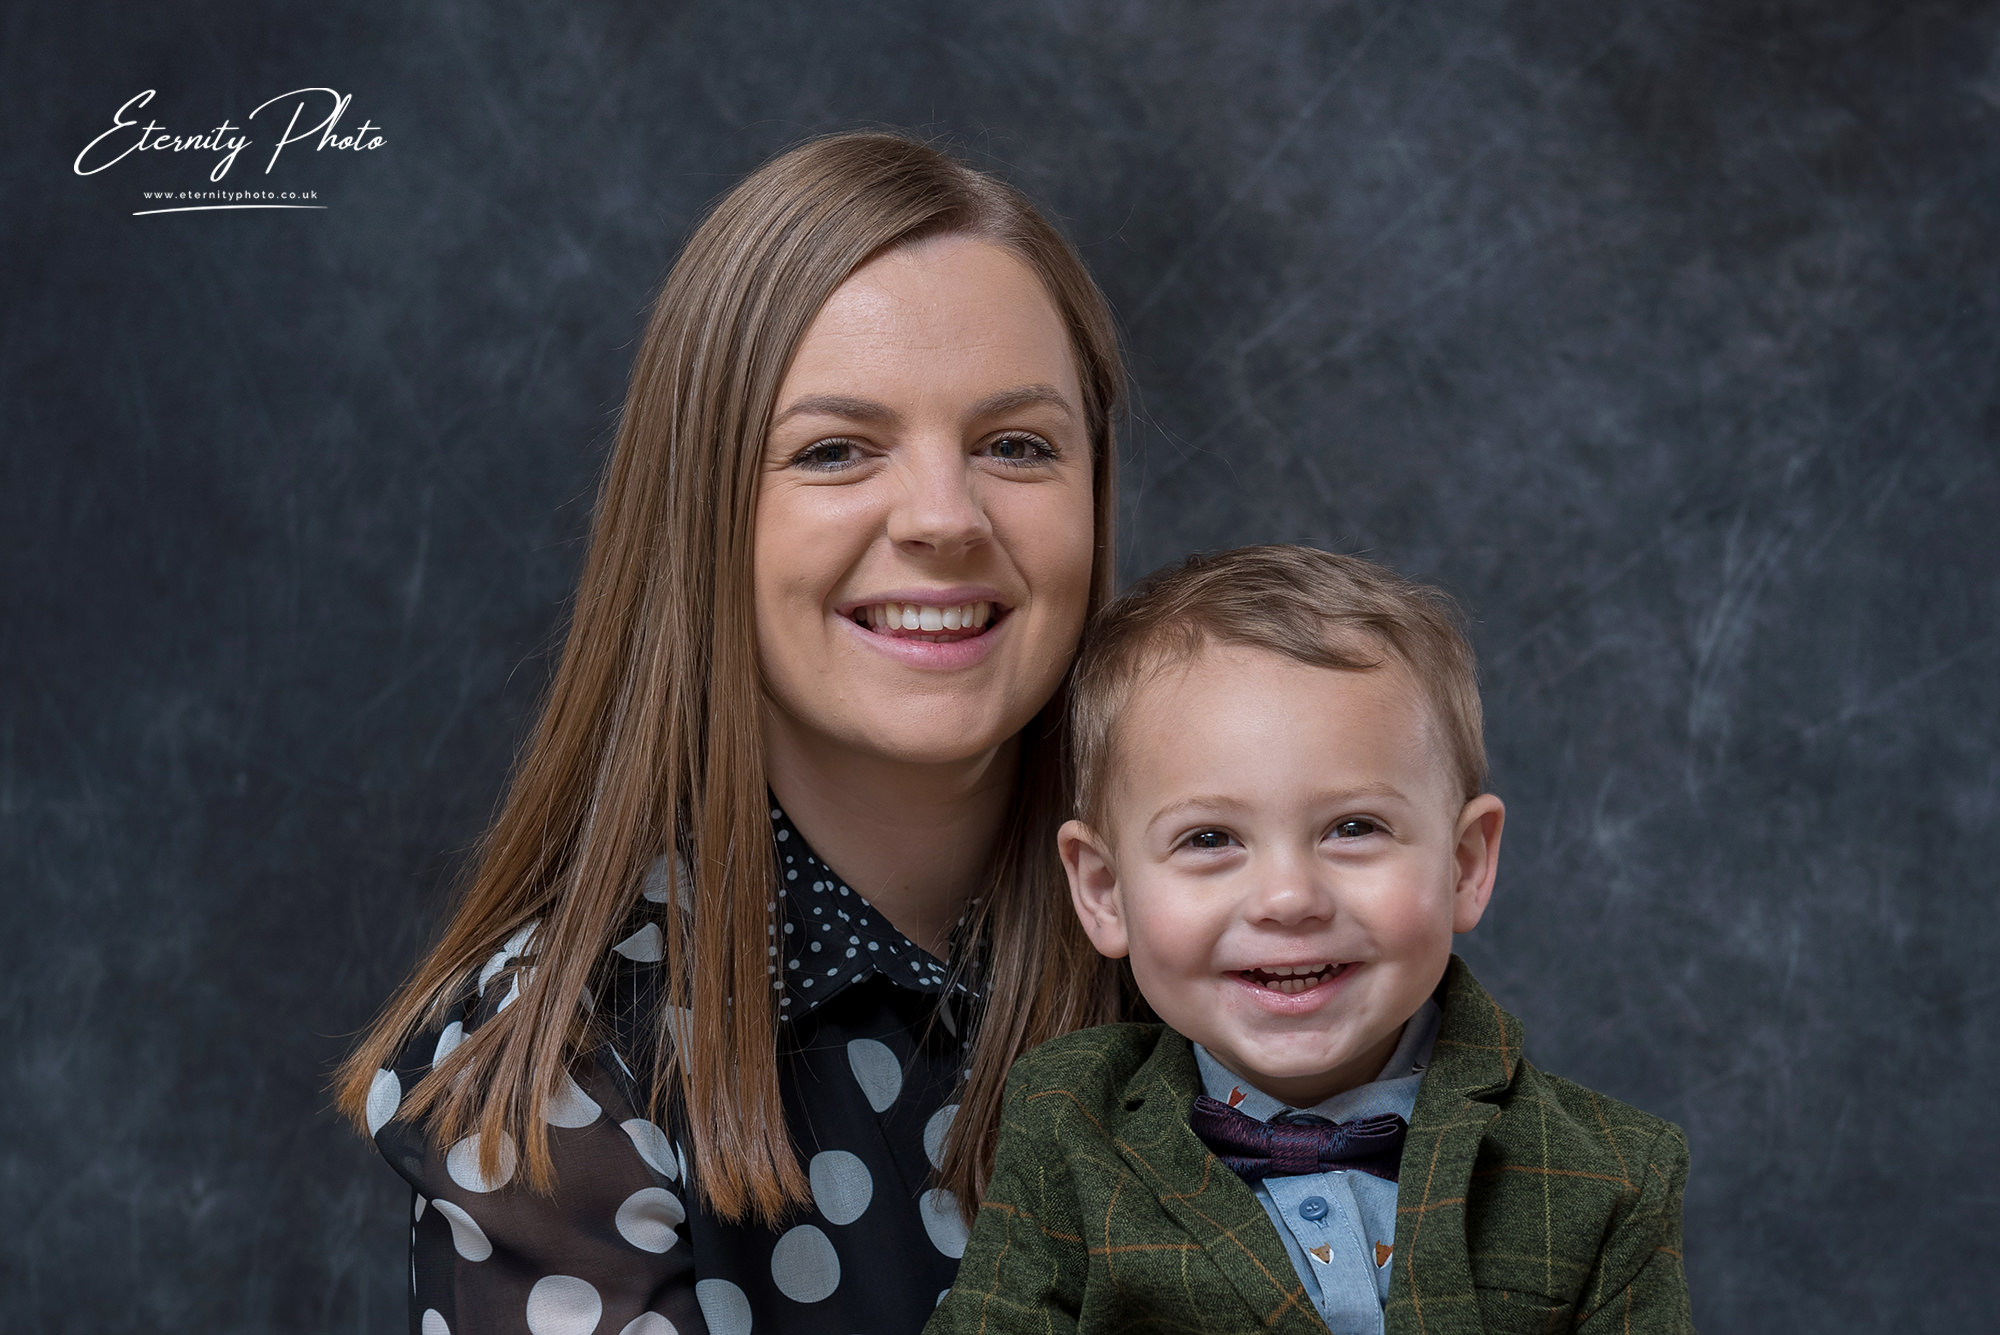 Woman and toddler smiling, studio portrait session.